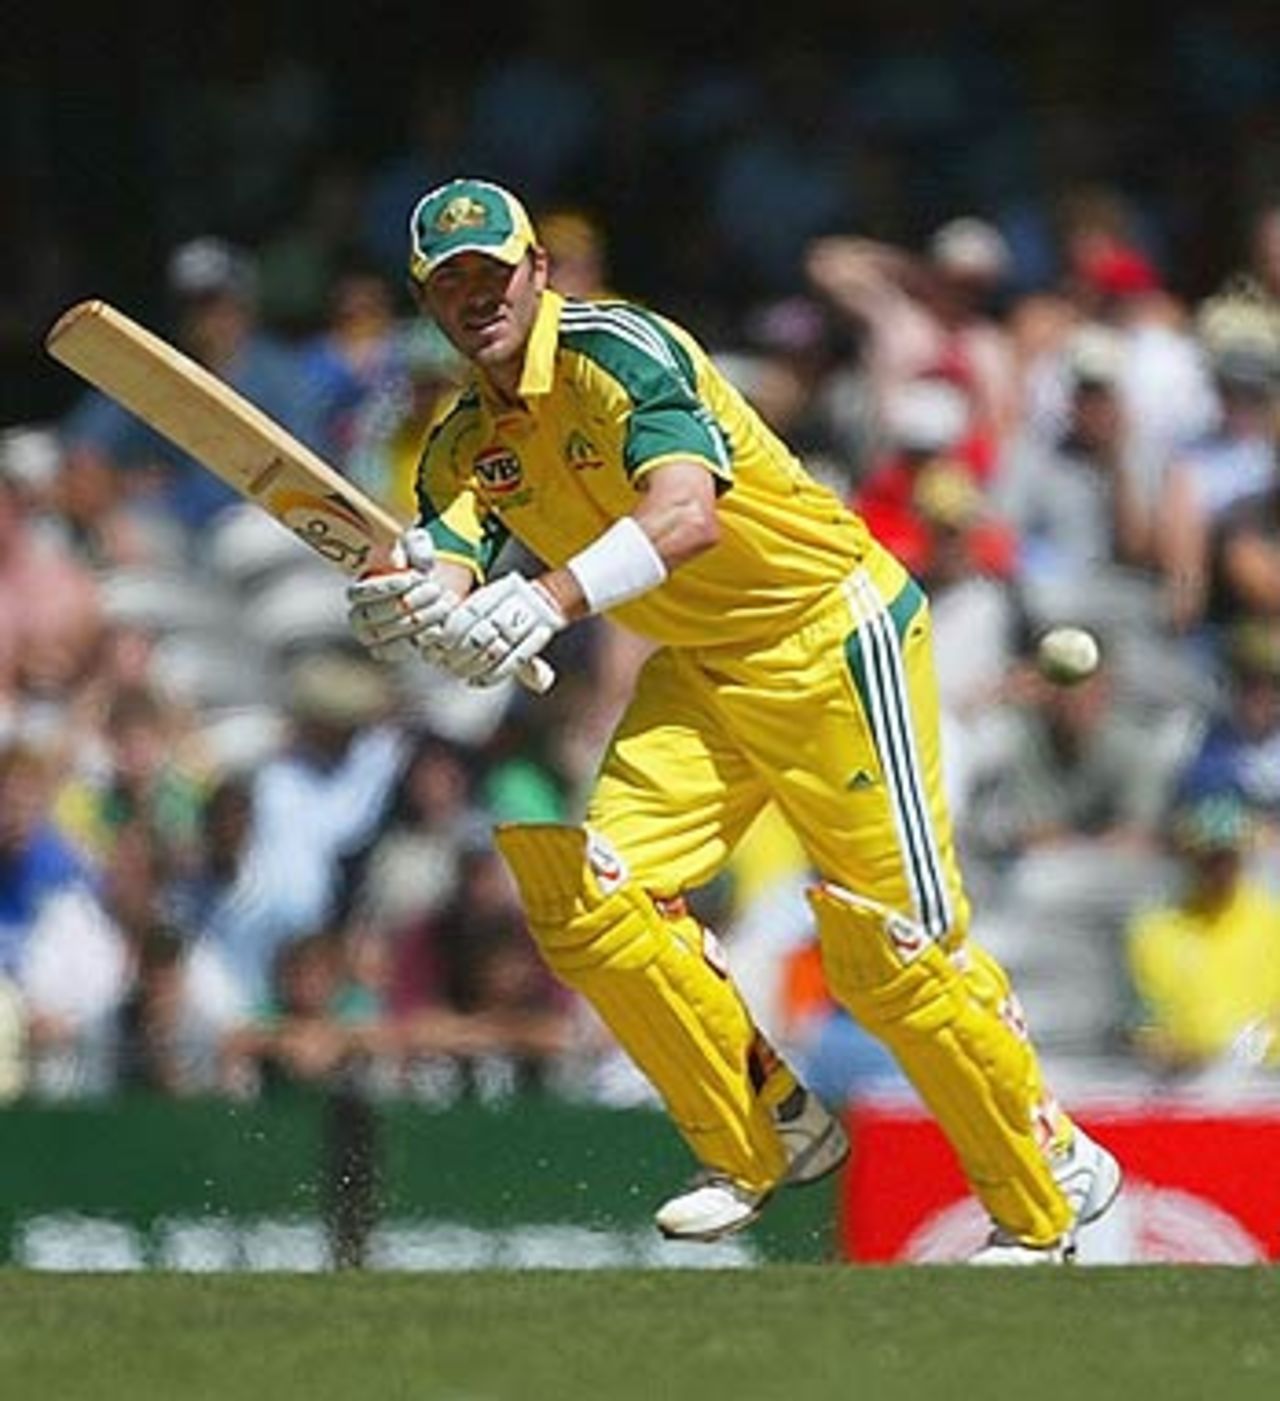 Damien Martyn was in fine touch during his 70, Australia v Sri Lanka, VB Series, Docklands Stadium, Melbourne, January 13, 2006